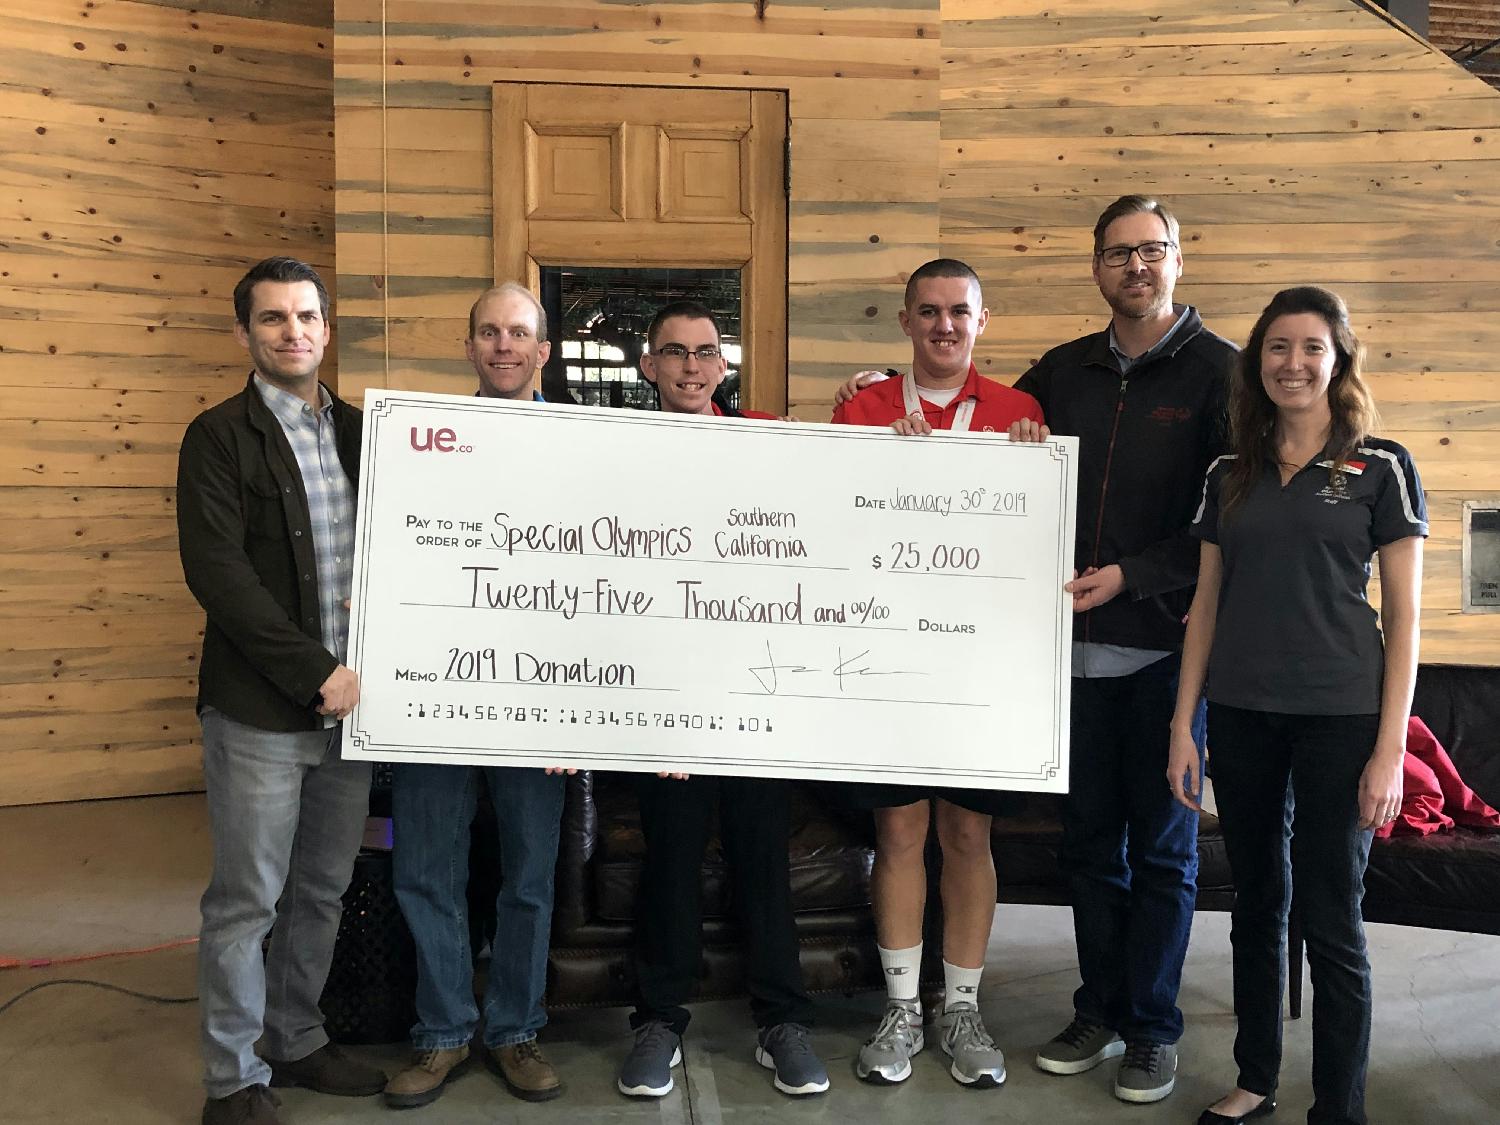 UE.co supports the Special Olympics Organization